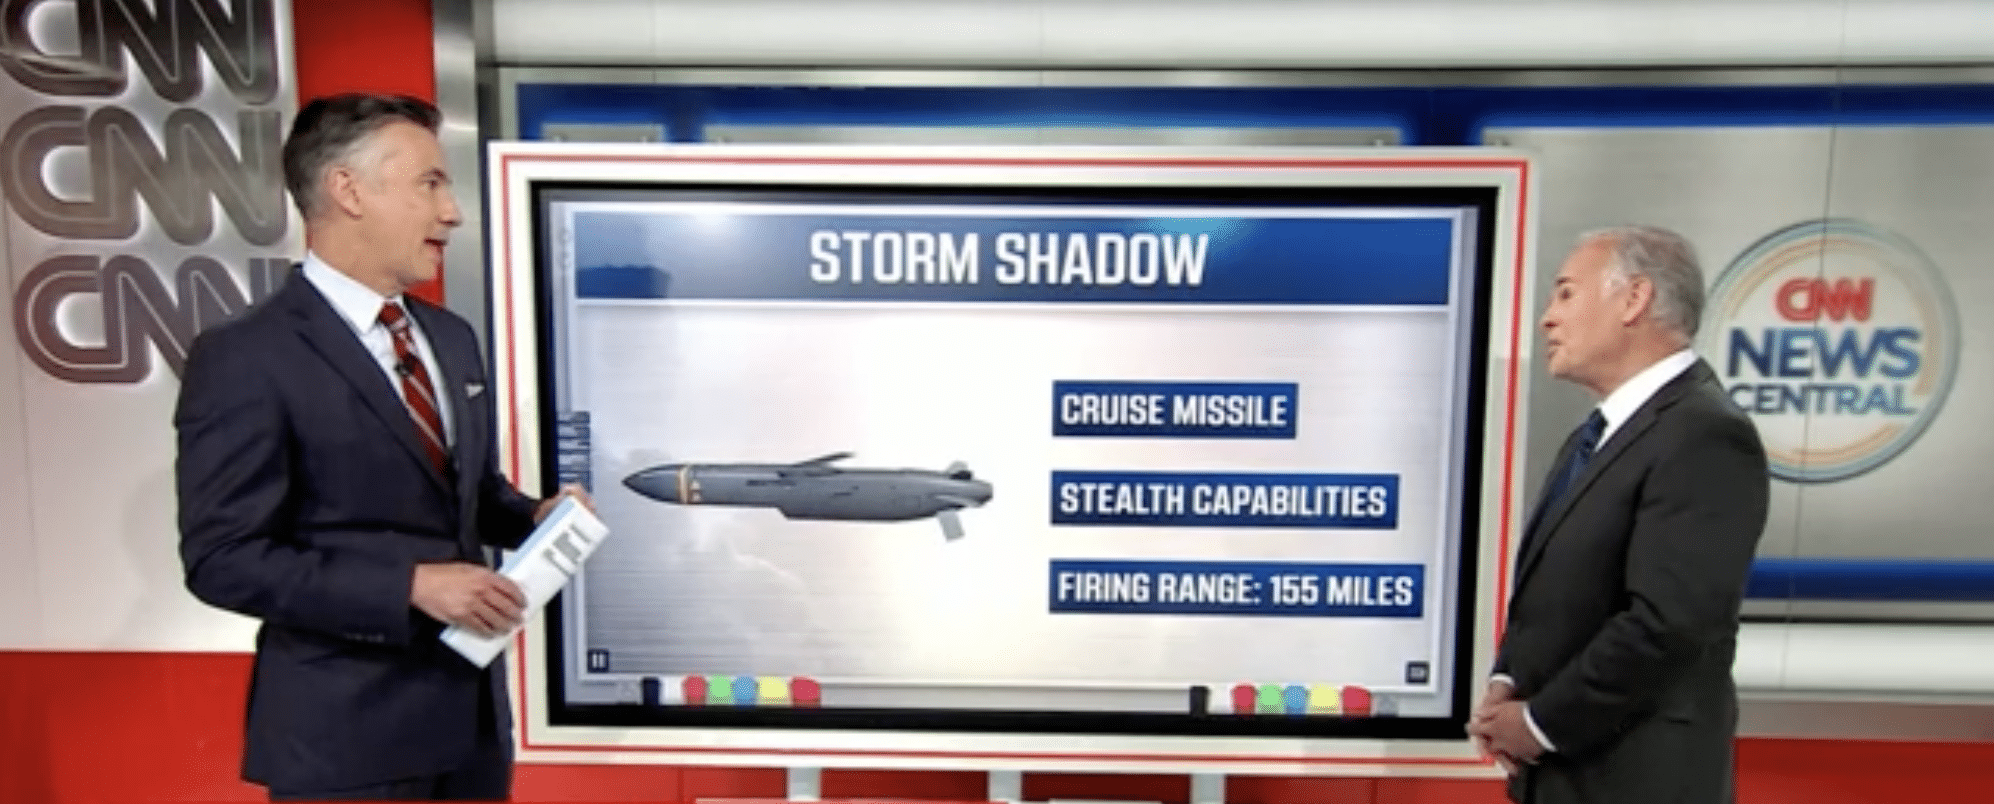 Britain has just delivered long-range ‘Storm Shadow’ cruise missiles to Ukraine ahead of expected counteroffensive